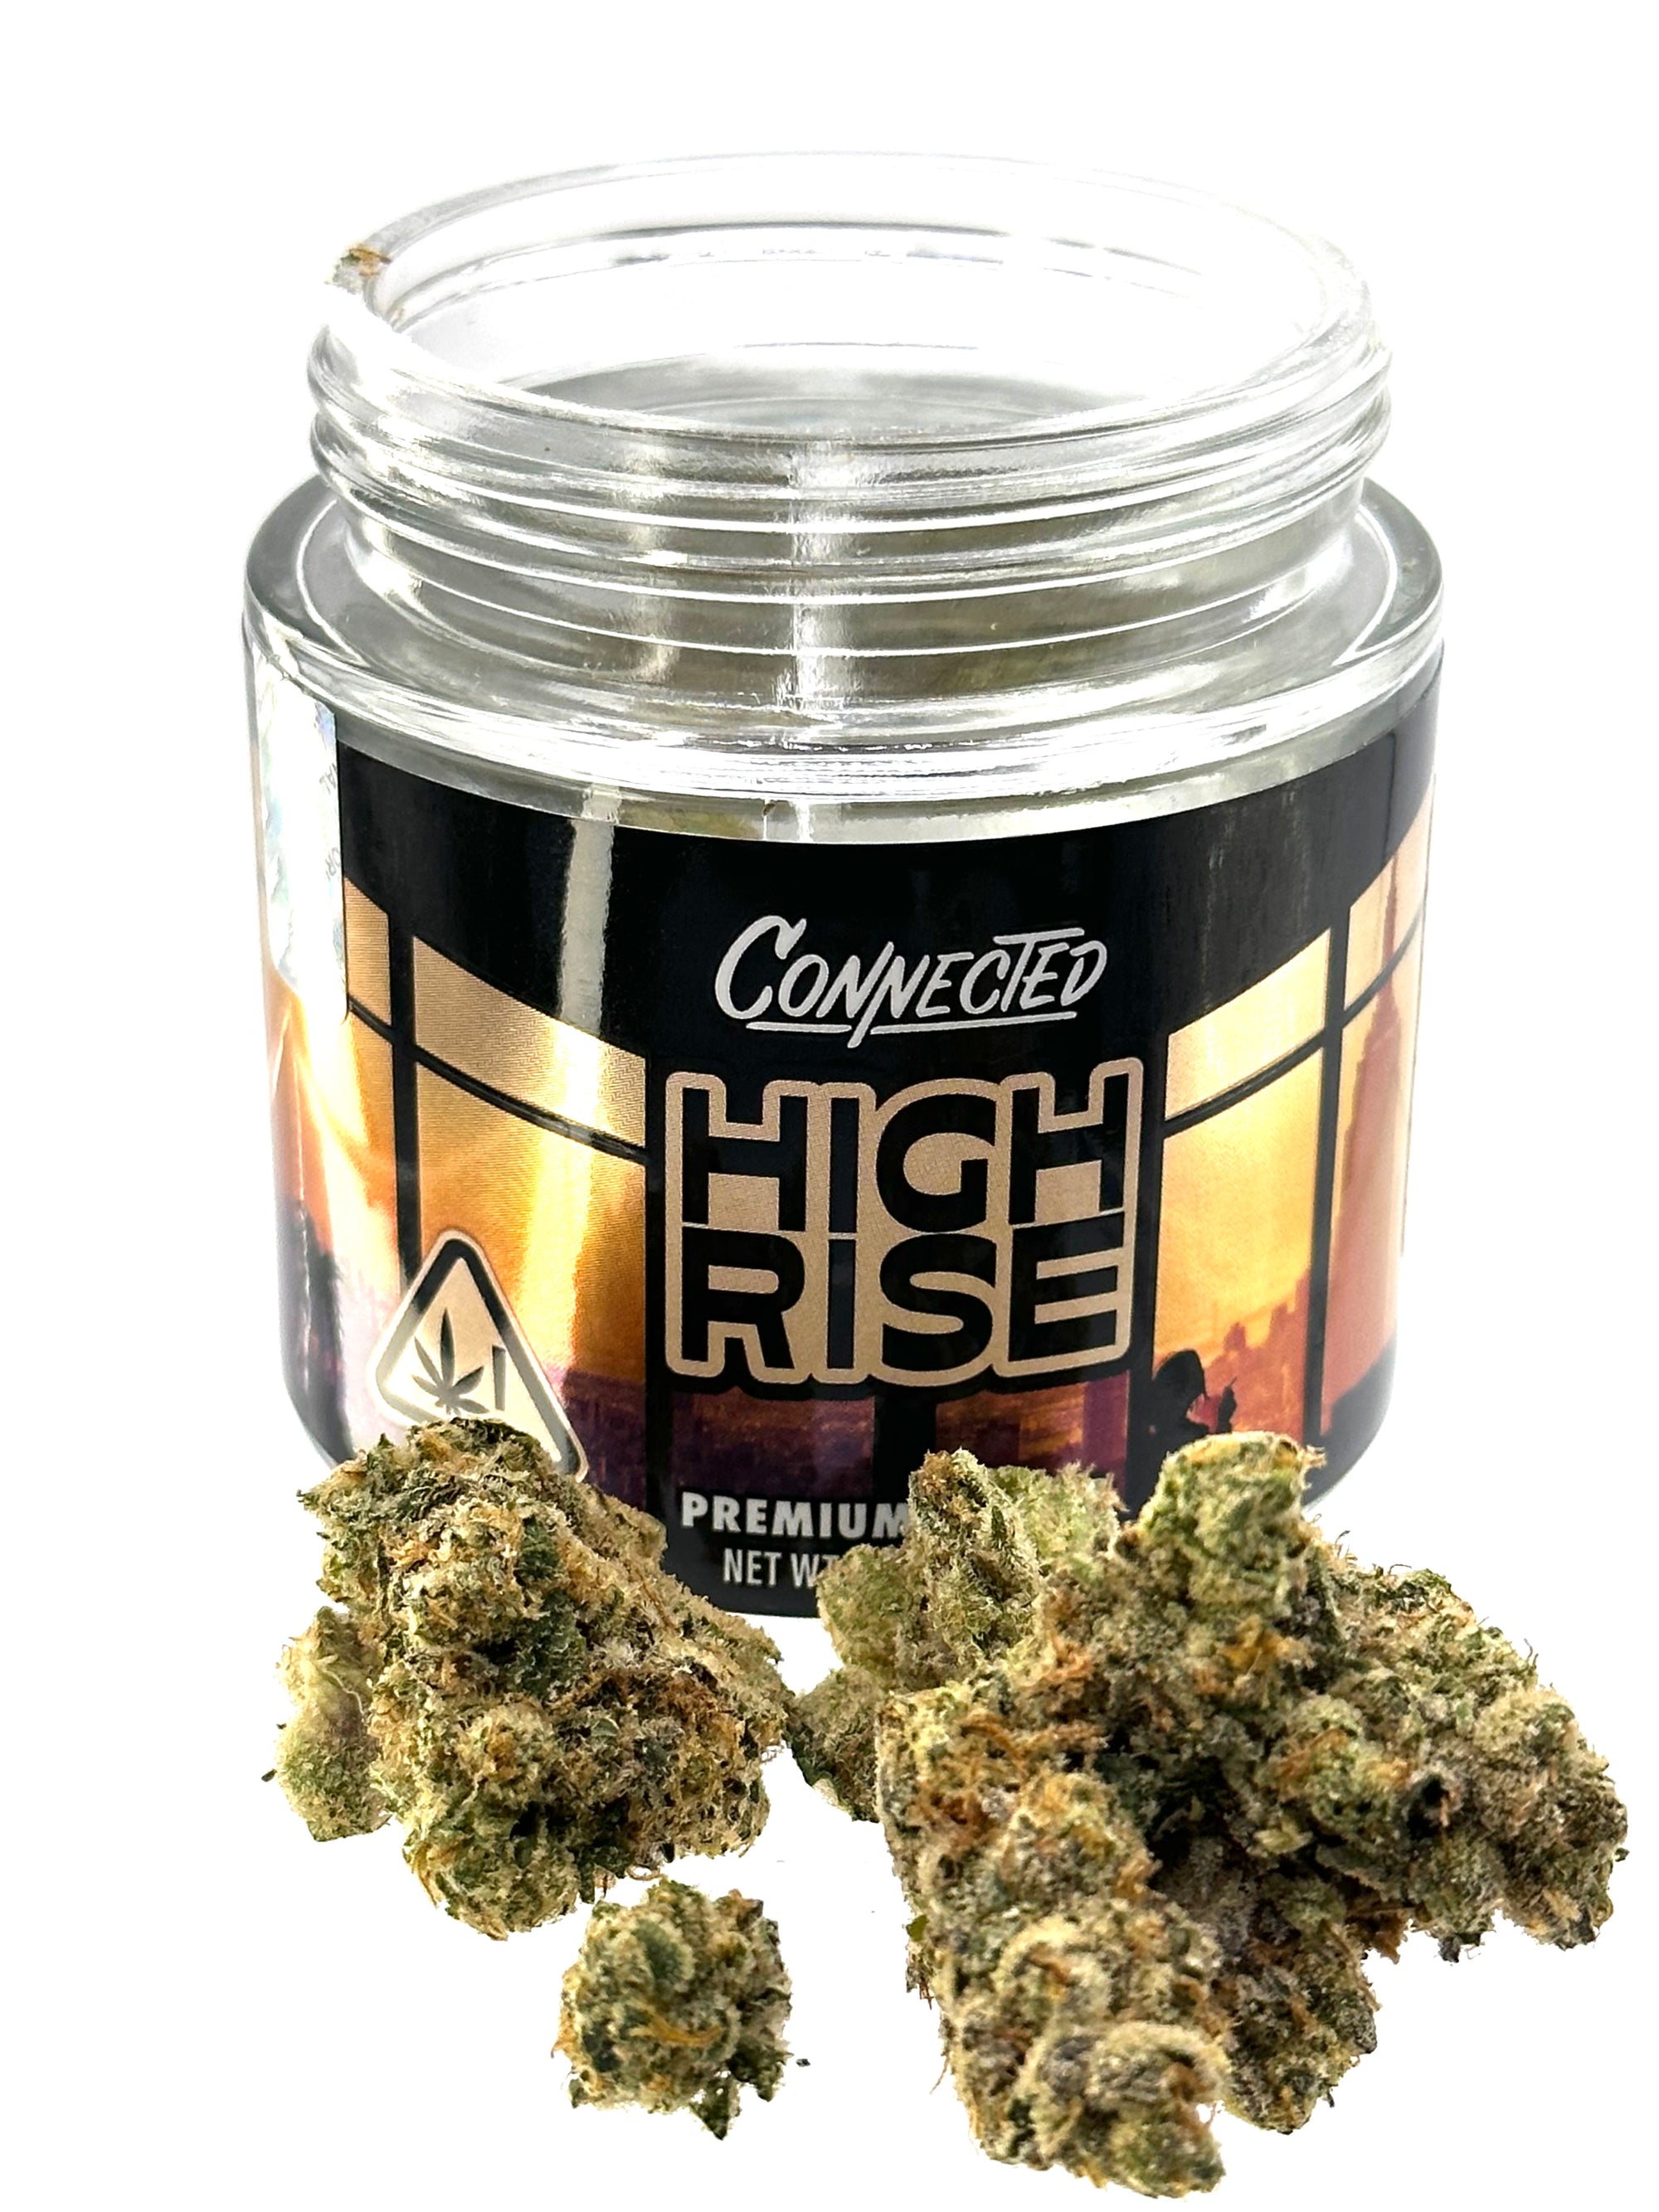 High Rise by Connected: Sativa Dominant